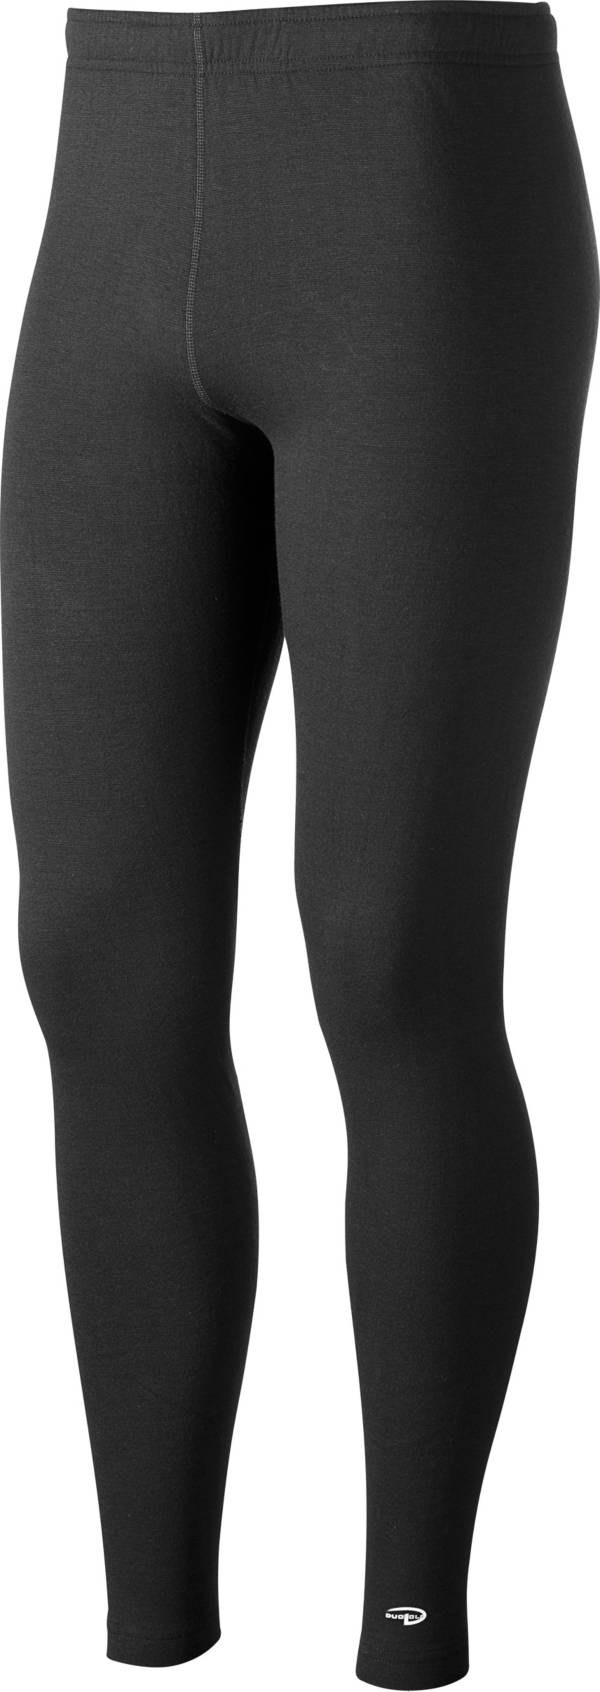 KMC8 - Duofold Varitherm Mid-Weight Mens Tights Style Ankle Length Bottom  Tall